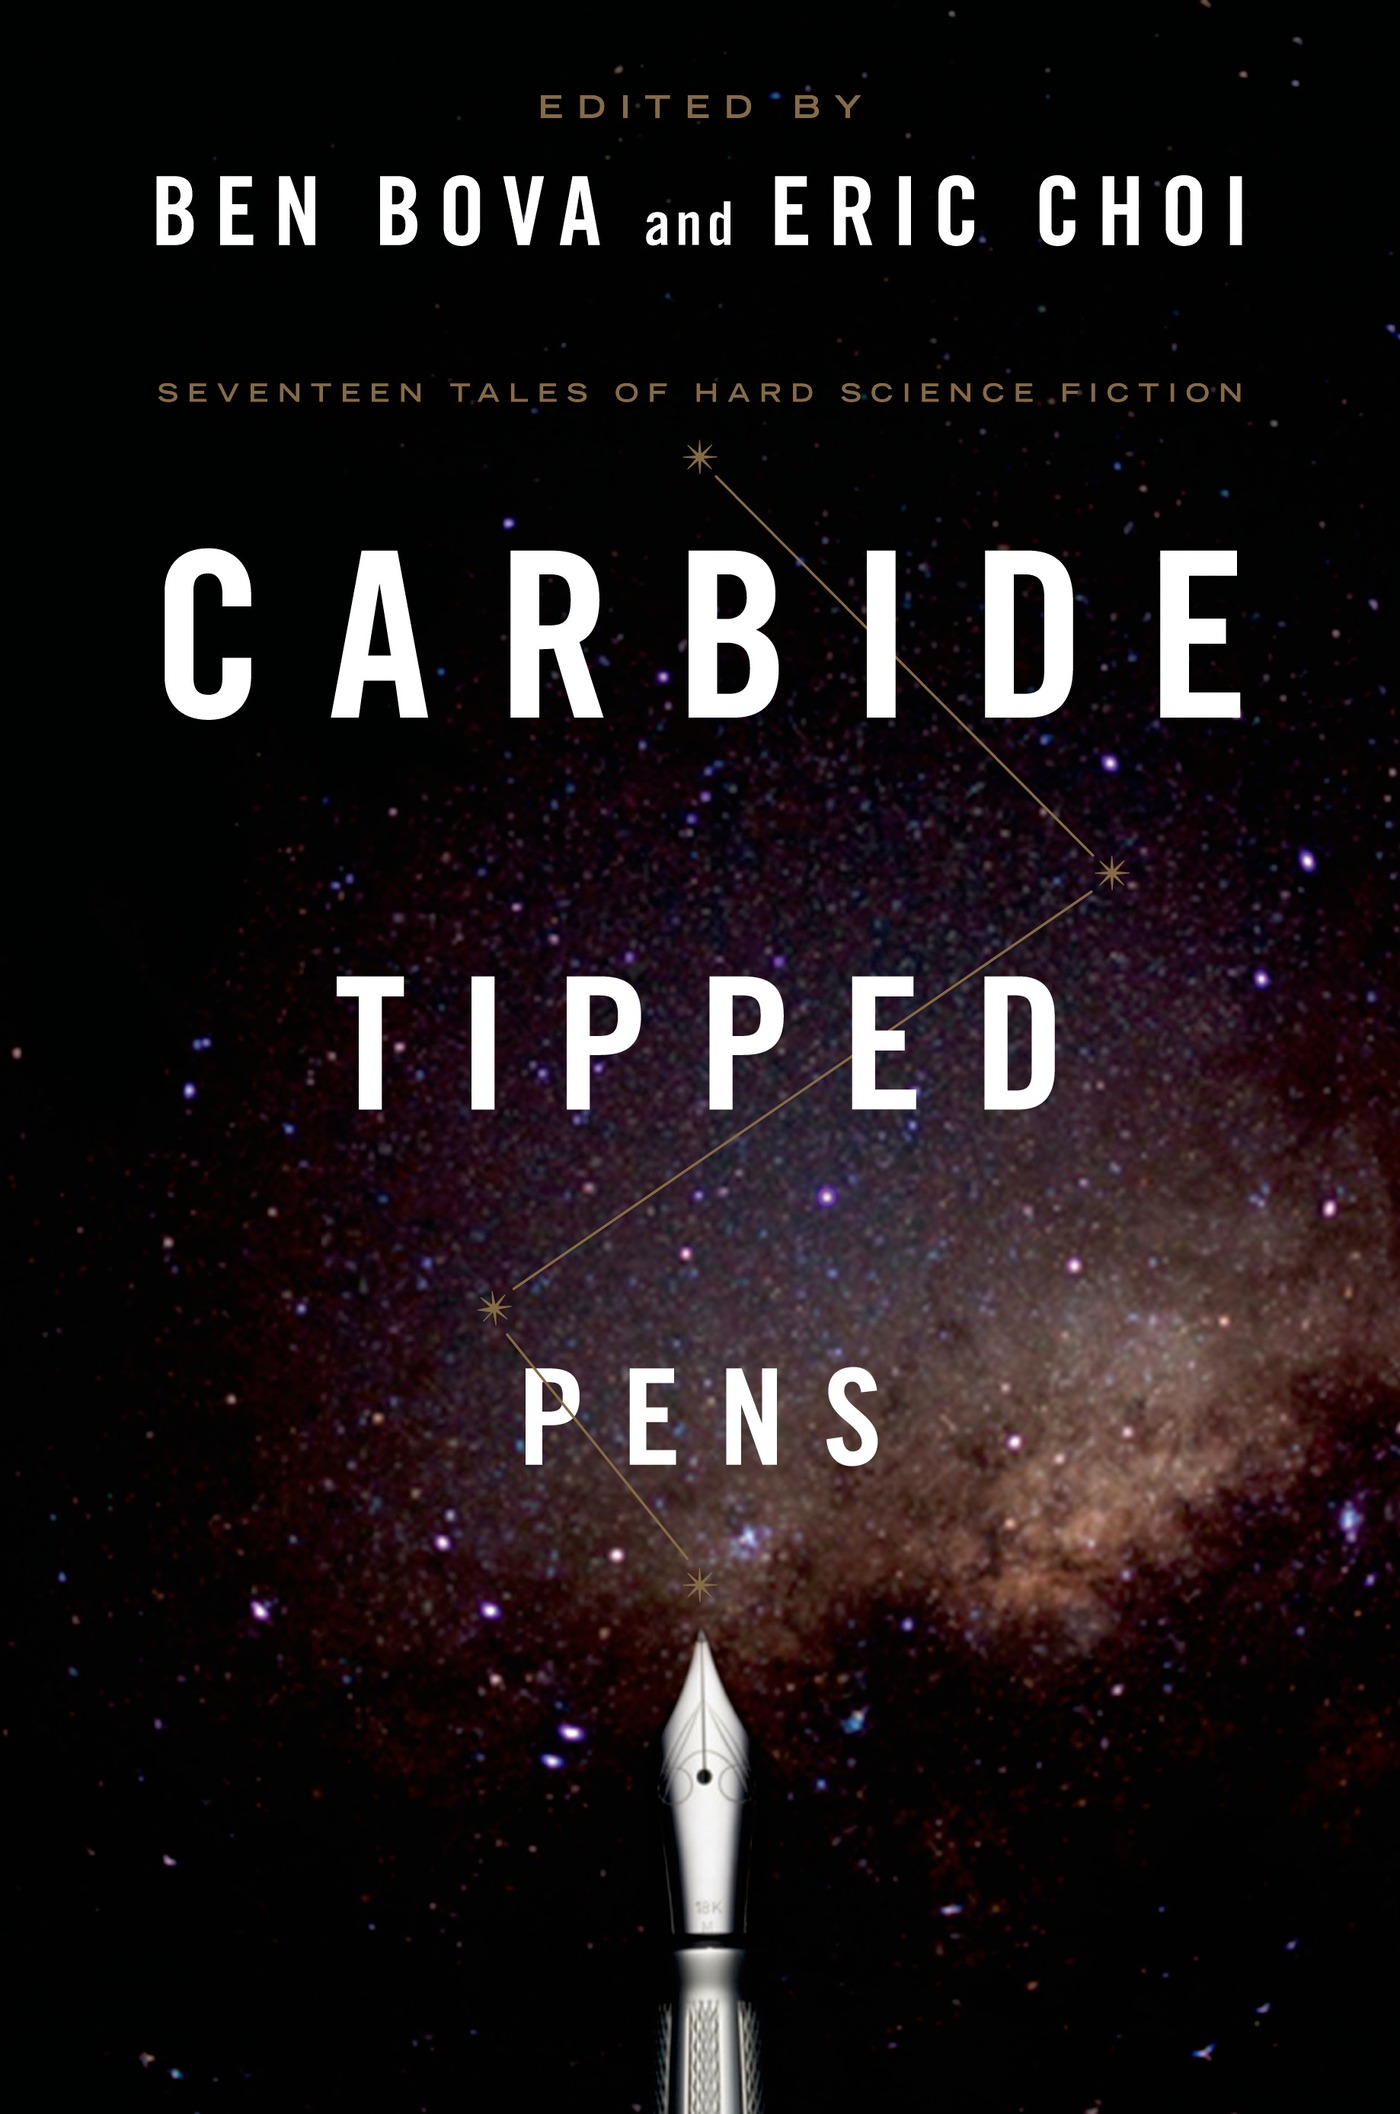 Carbide Tipped Pens : Seventeen Tales of Hard Science Fiction by Ben Bova, Ben Bova, Eric Choi, Eric Choi